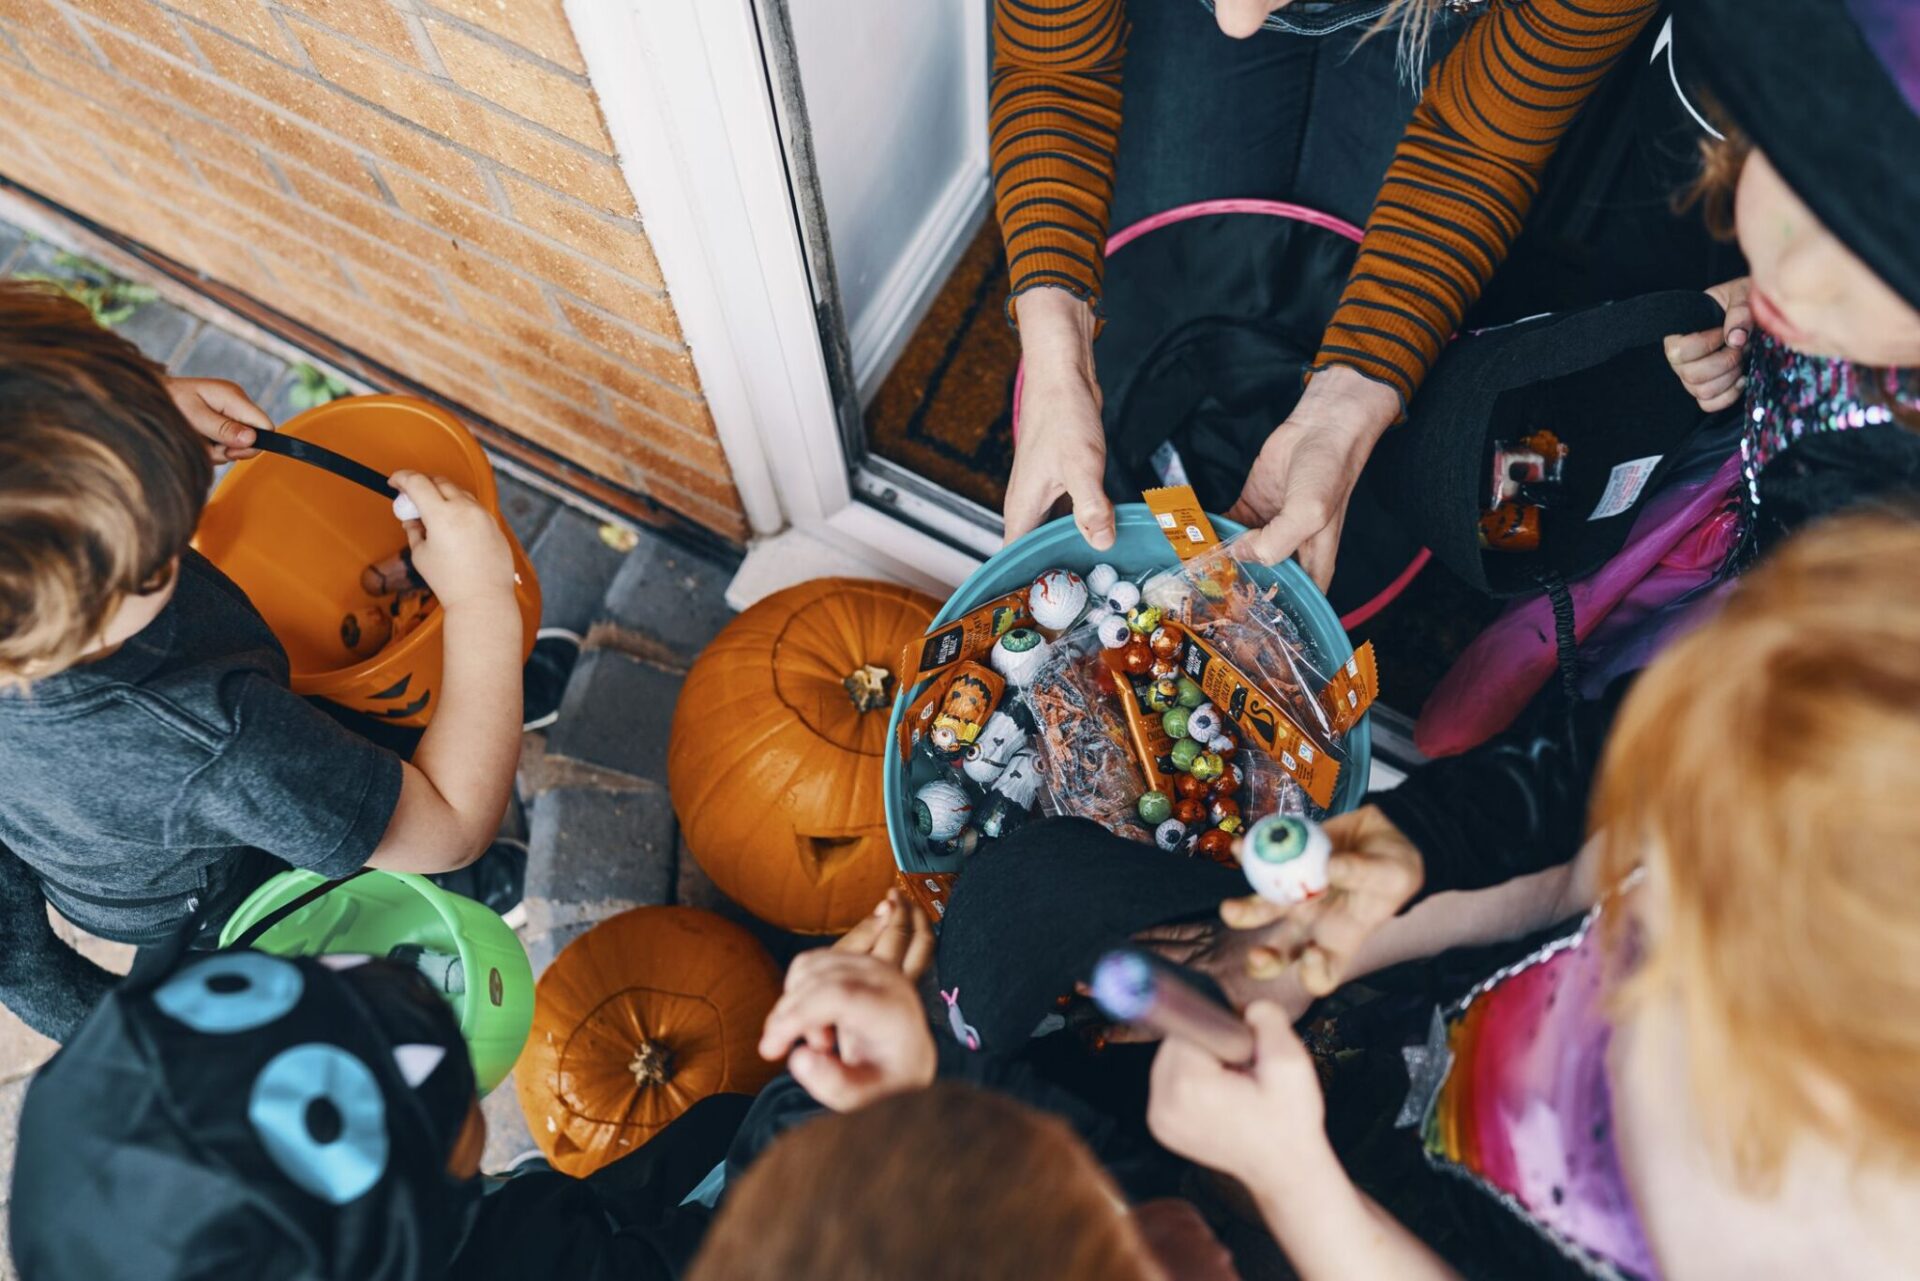 Halloween offers candy filled fun for all to enjoy! Check out these five tips for a healthy and safe Halloween this year from Corken + Company.